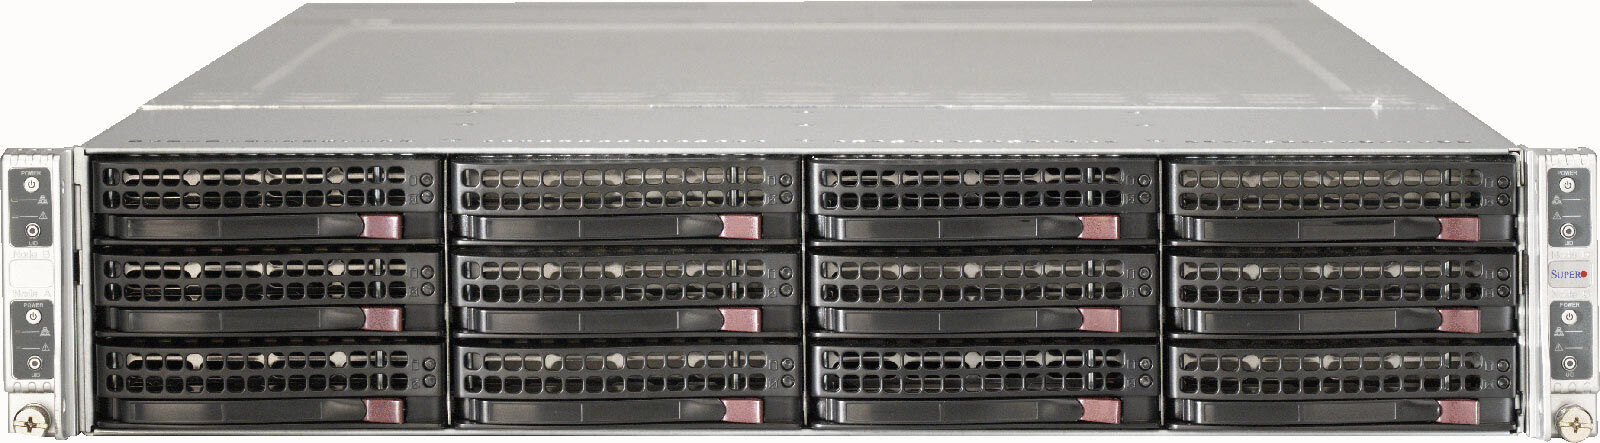 Supermicro SYS-6028TP-HTTR Barebones Server X10DRT-PT NEW IN STOCK 5 Yr Wty